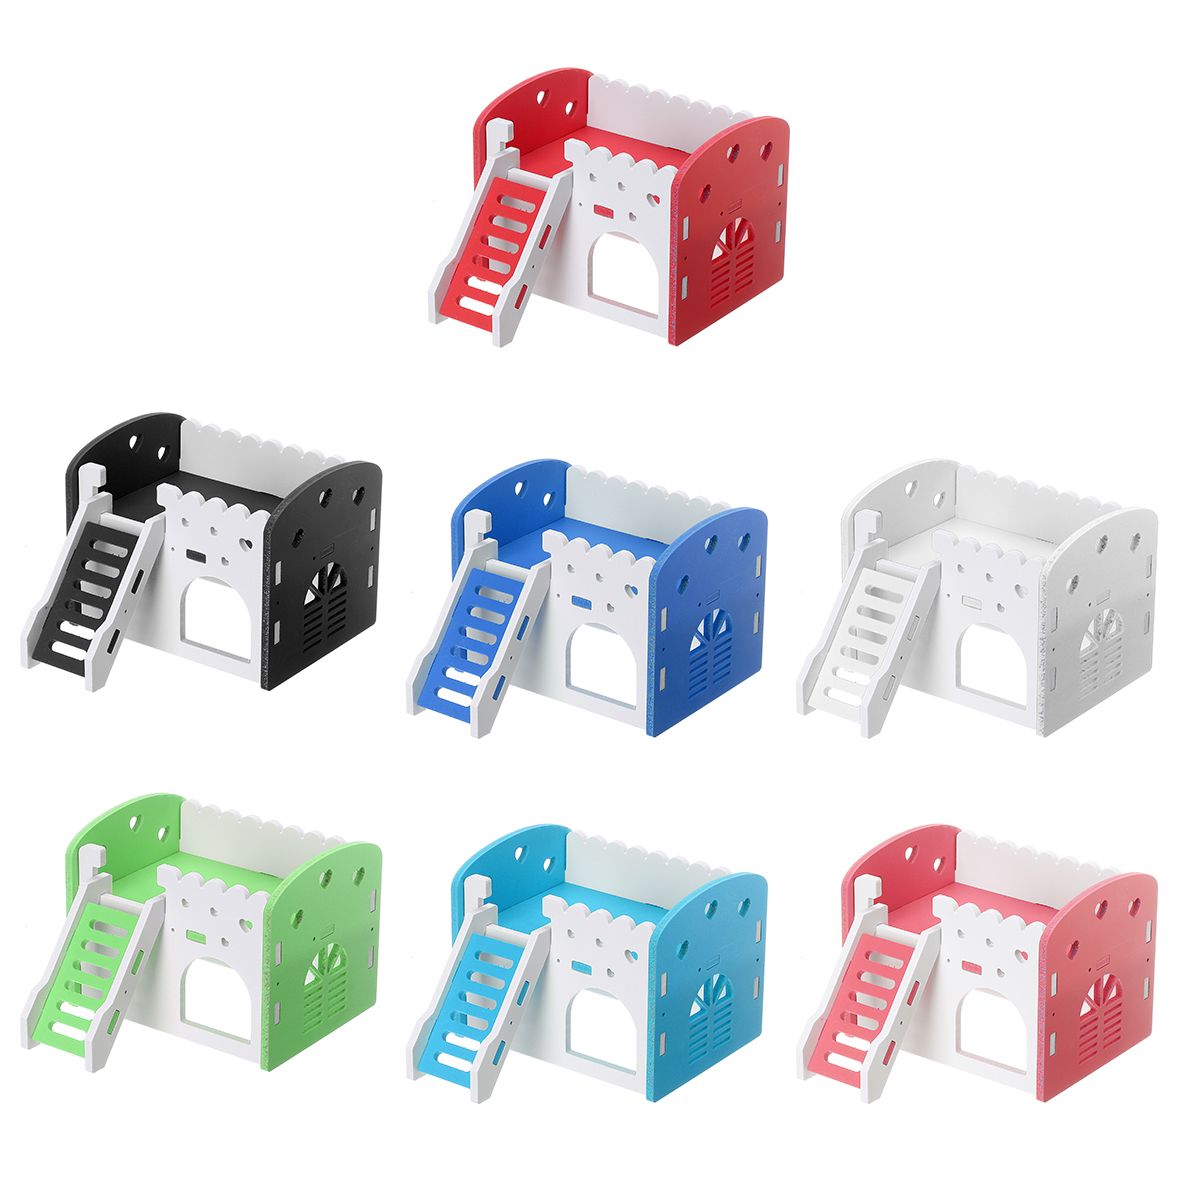 Dual-Layer-Ladder-Hamster-House-Small-Animal-Pet-Mouse-Cage-Castle-Exercise-Toys-1632243